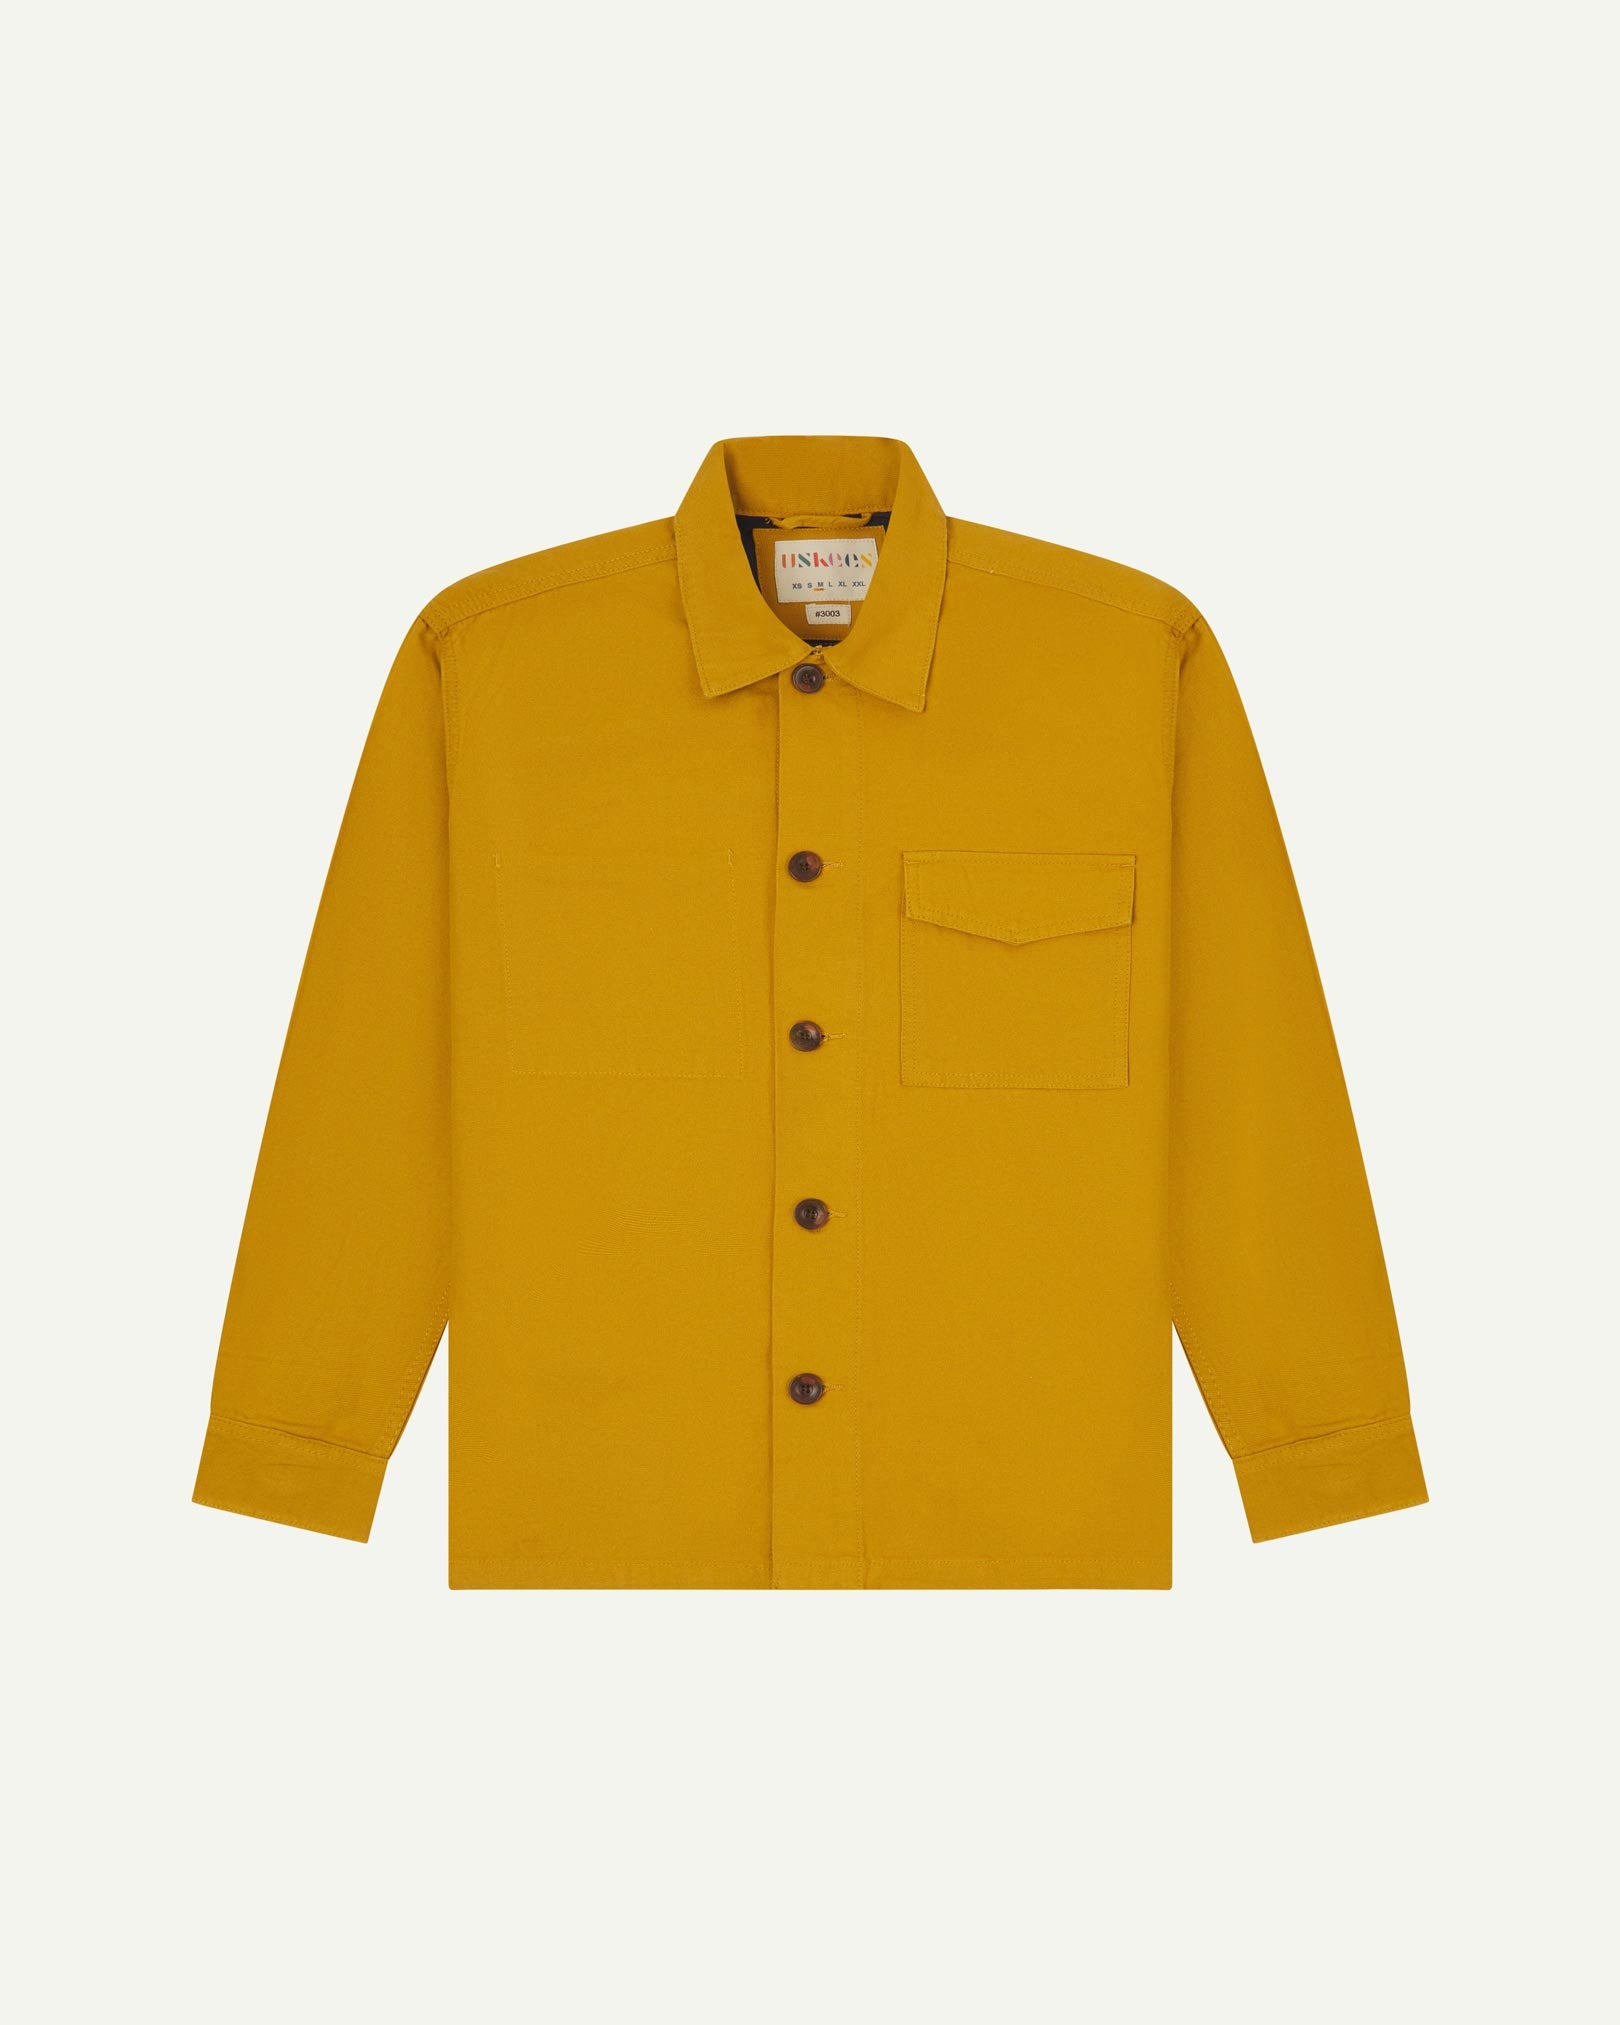 Yellow buttoned organic cotton workshirt from Uskees with clear view of chest pocket and Uskees branding label.